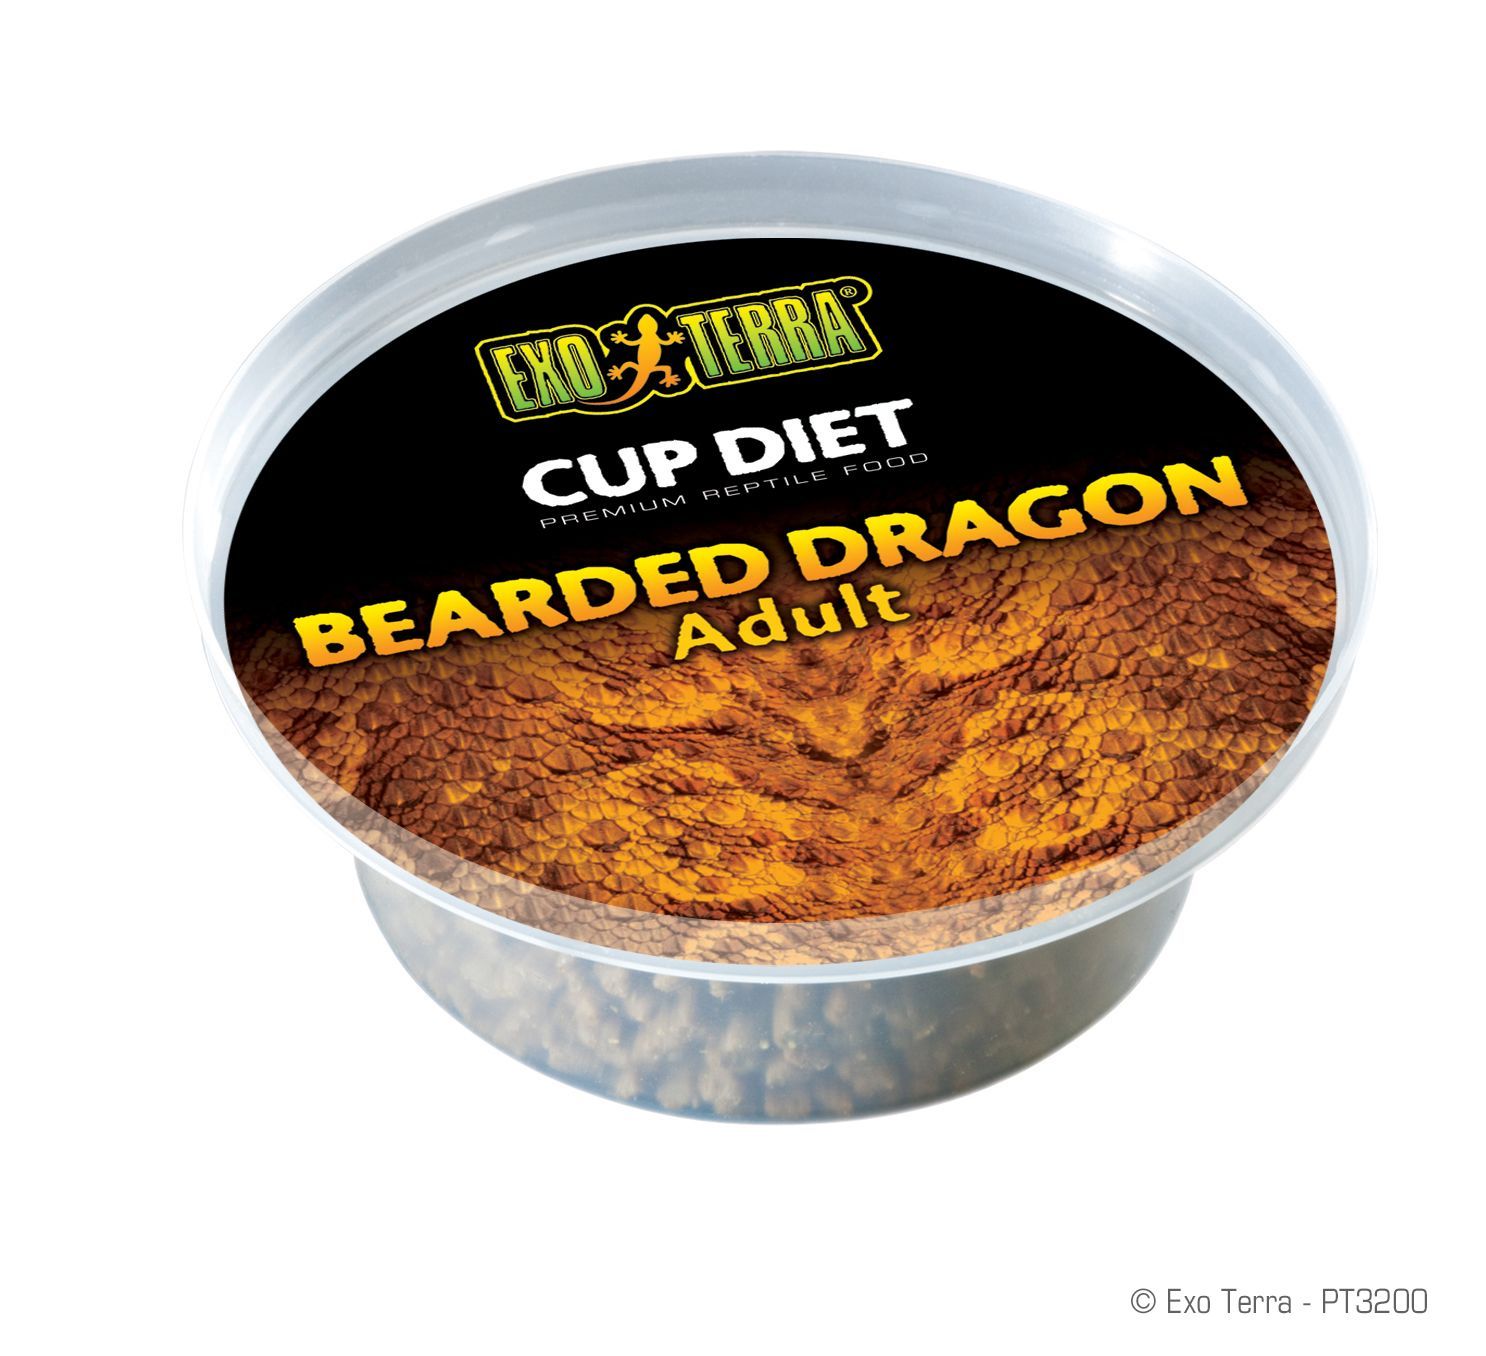 best of Food dragon Adult bearded